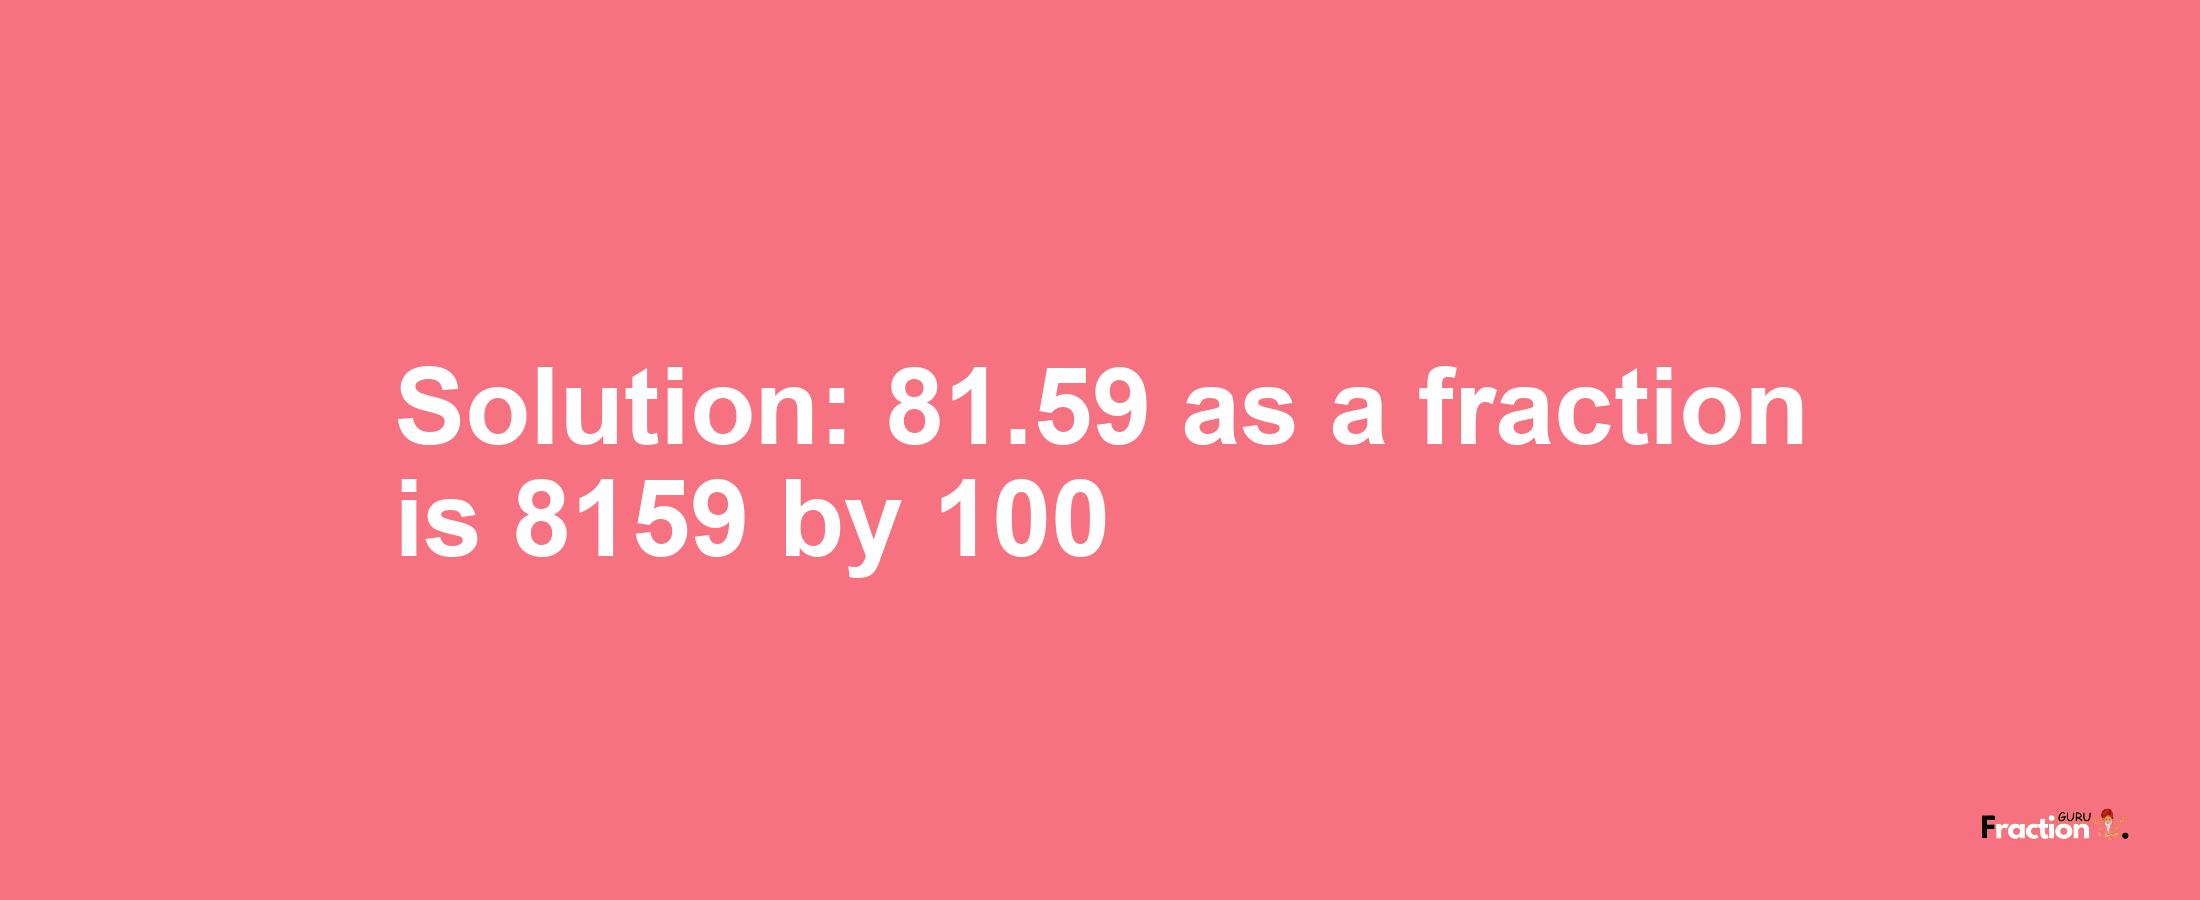 Solution:81.59 as a fraction is 8159/100